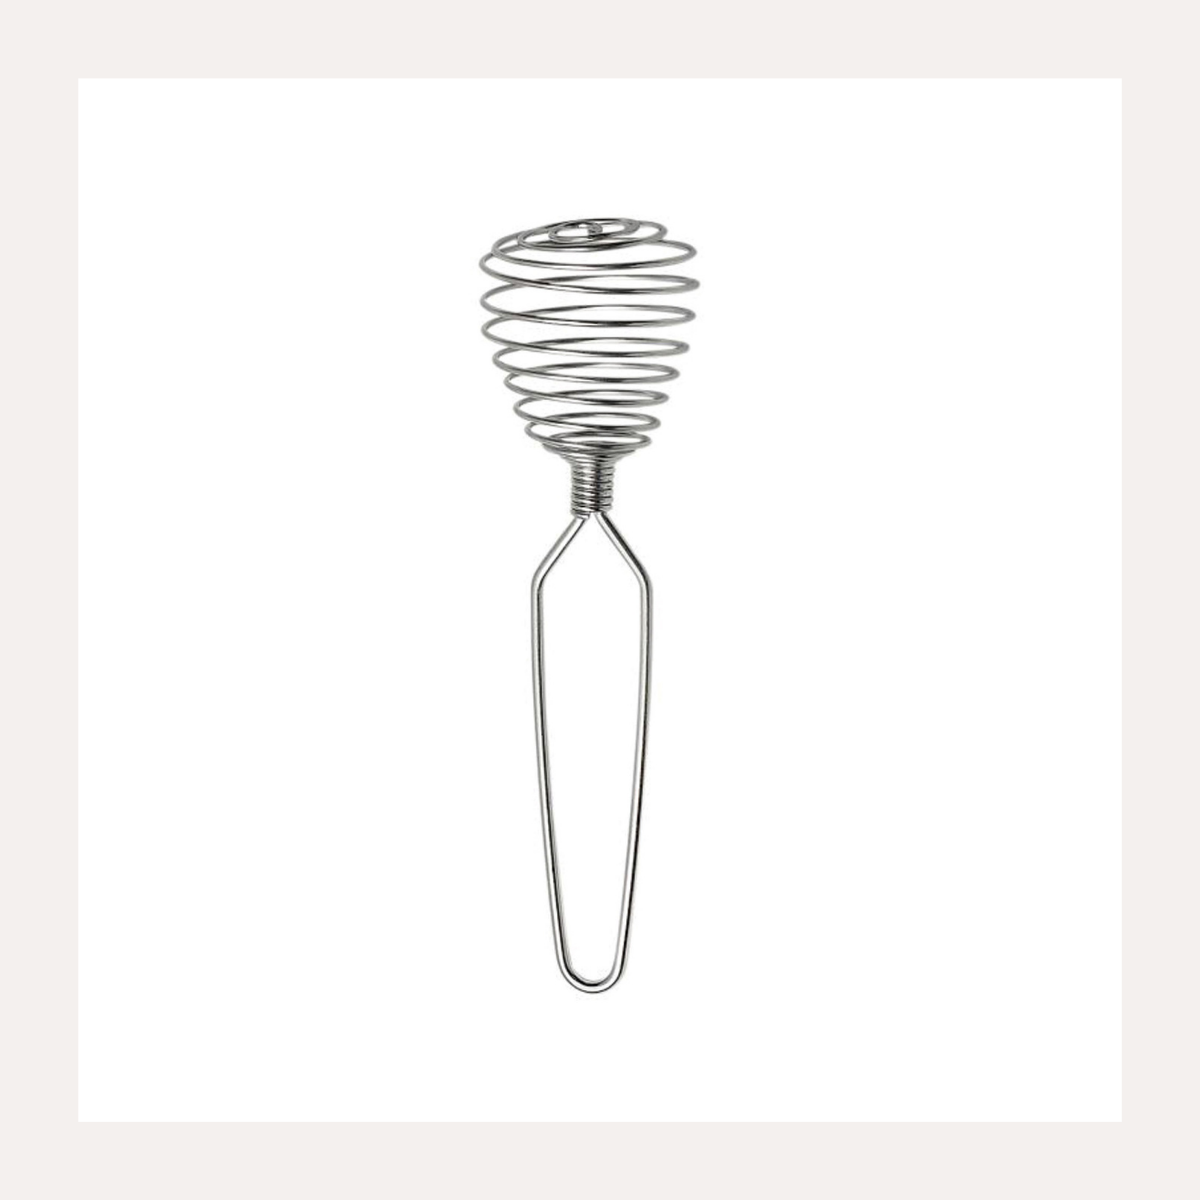 Stainless Steel Wire Spiral Whisk Egg Beater With Wooden Handle